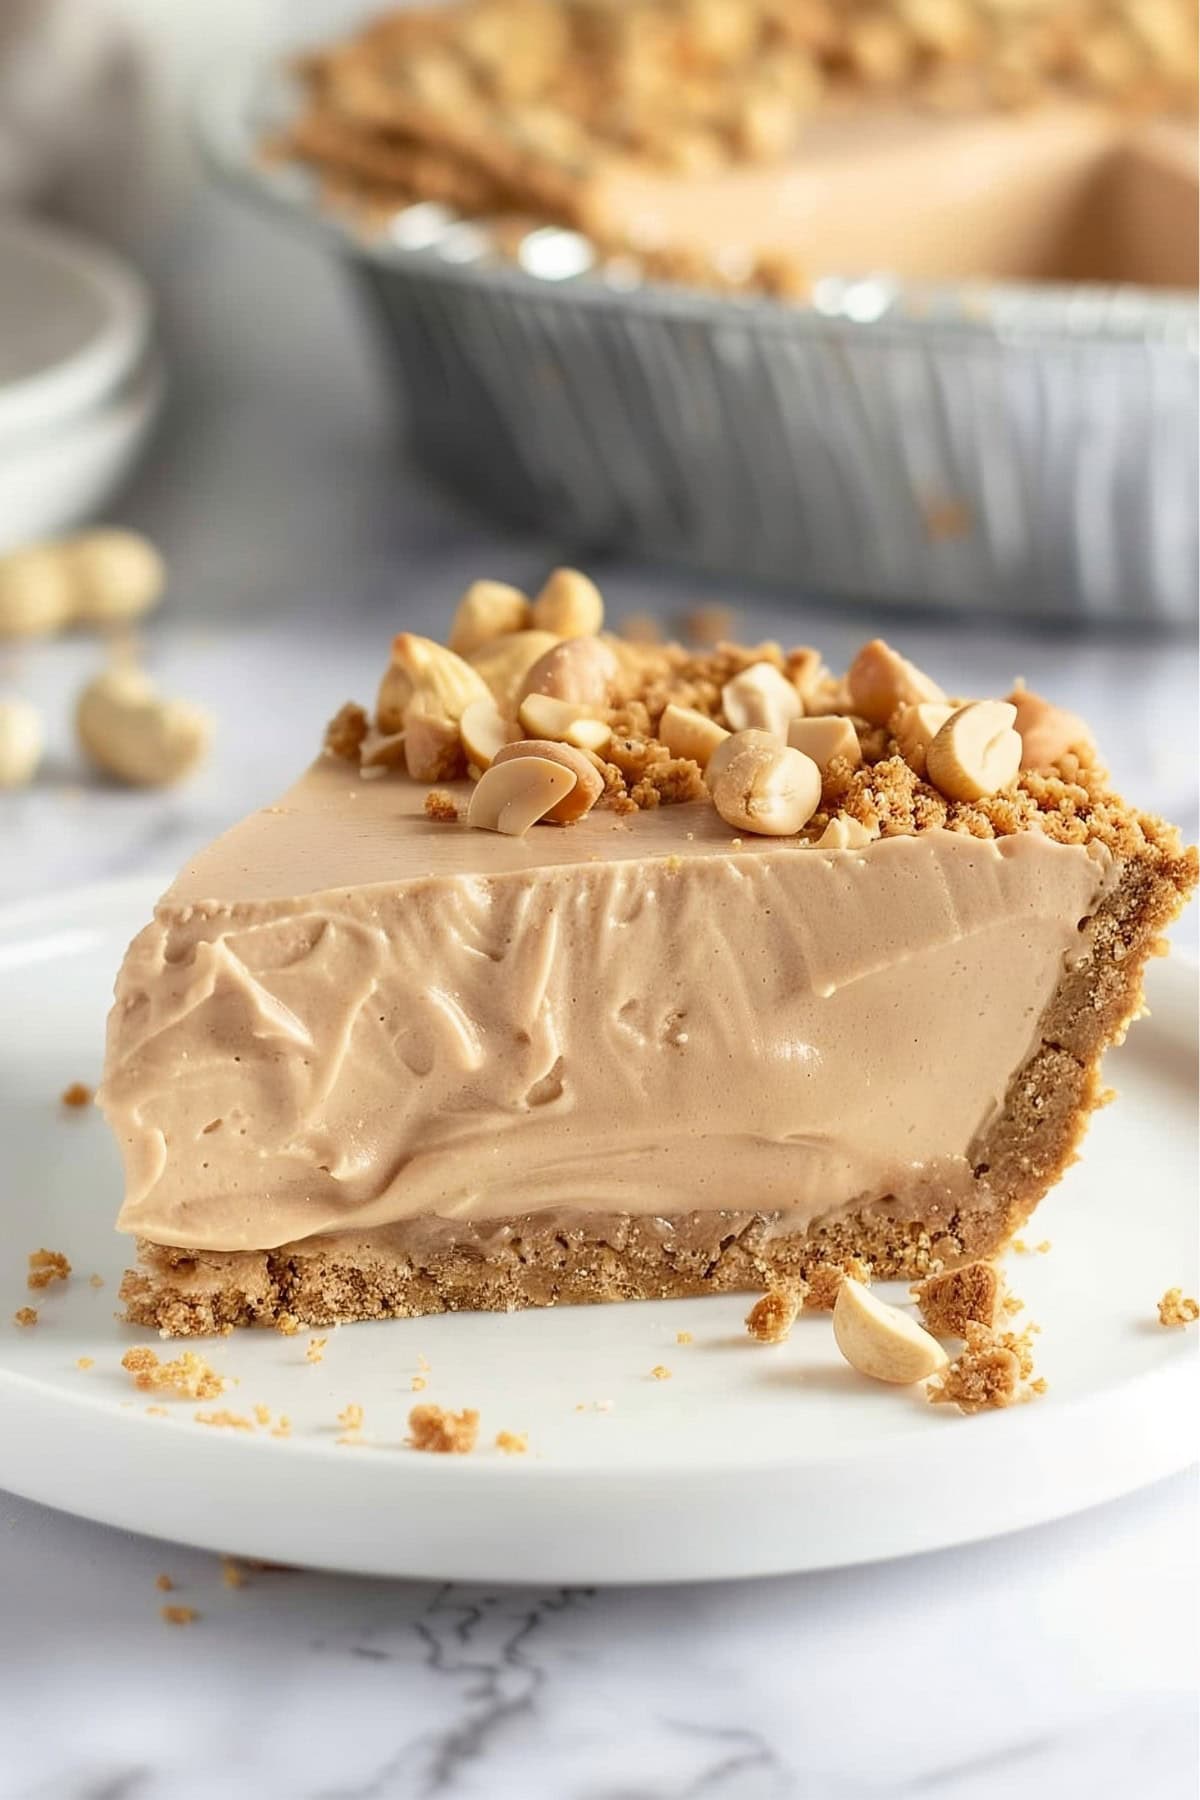 Close up of a Slice of Peanut Butter Cream Pie, Topped with Peanuts and Graham Cracker Crumbles on a White Plate with the Whole Pie in the Background